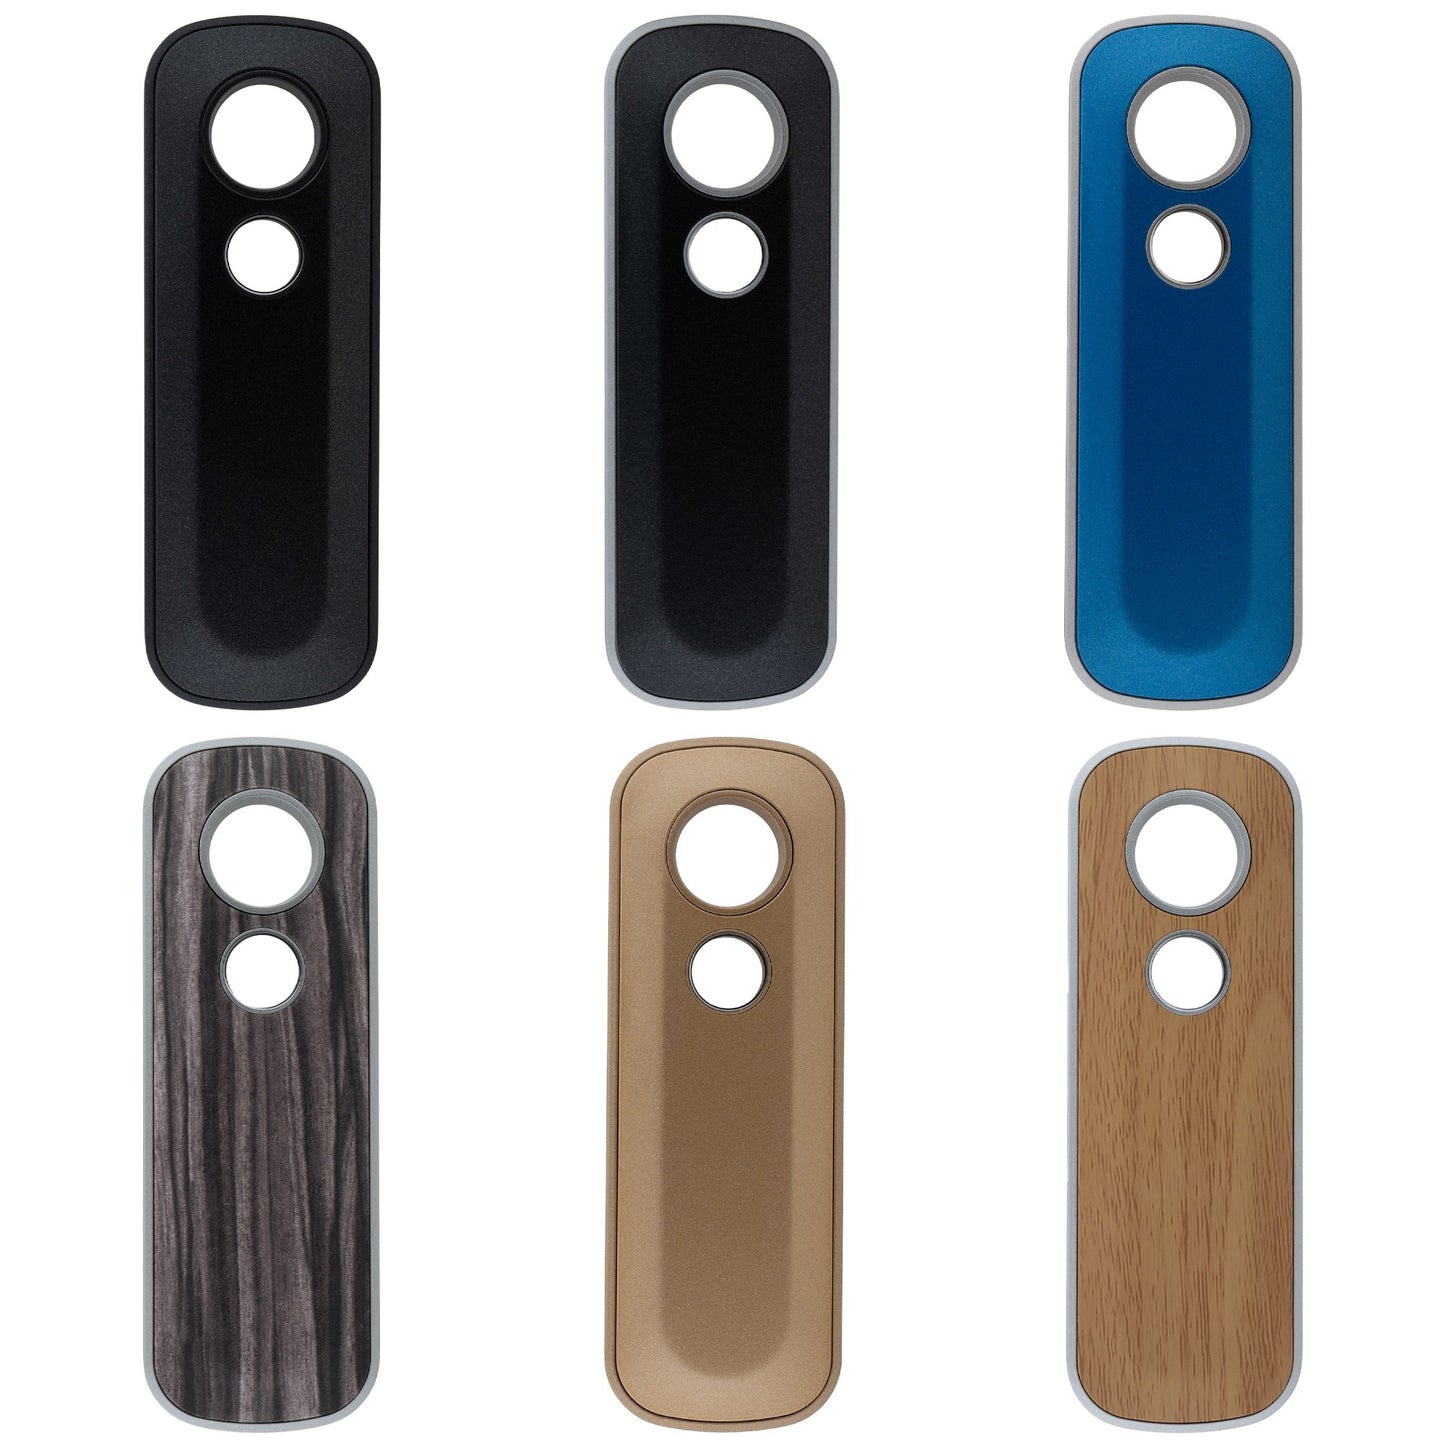 Firefly 2+ Top Lid Vaporizers FireFly 